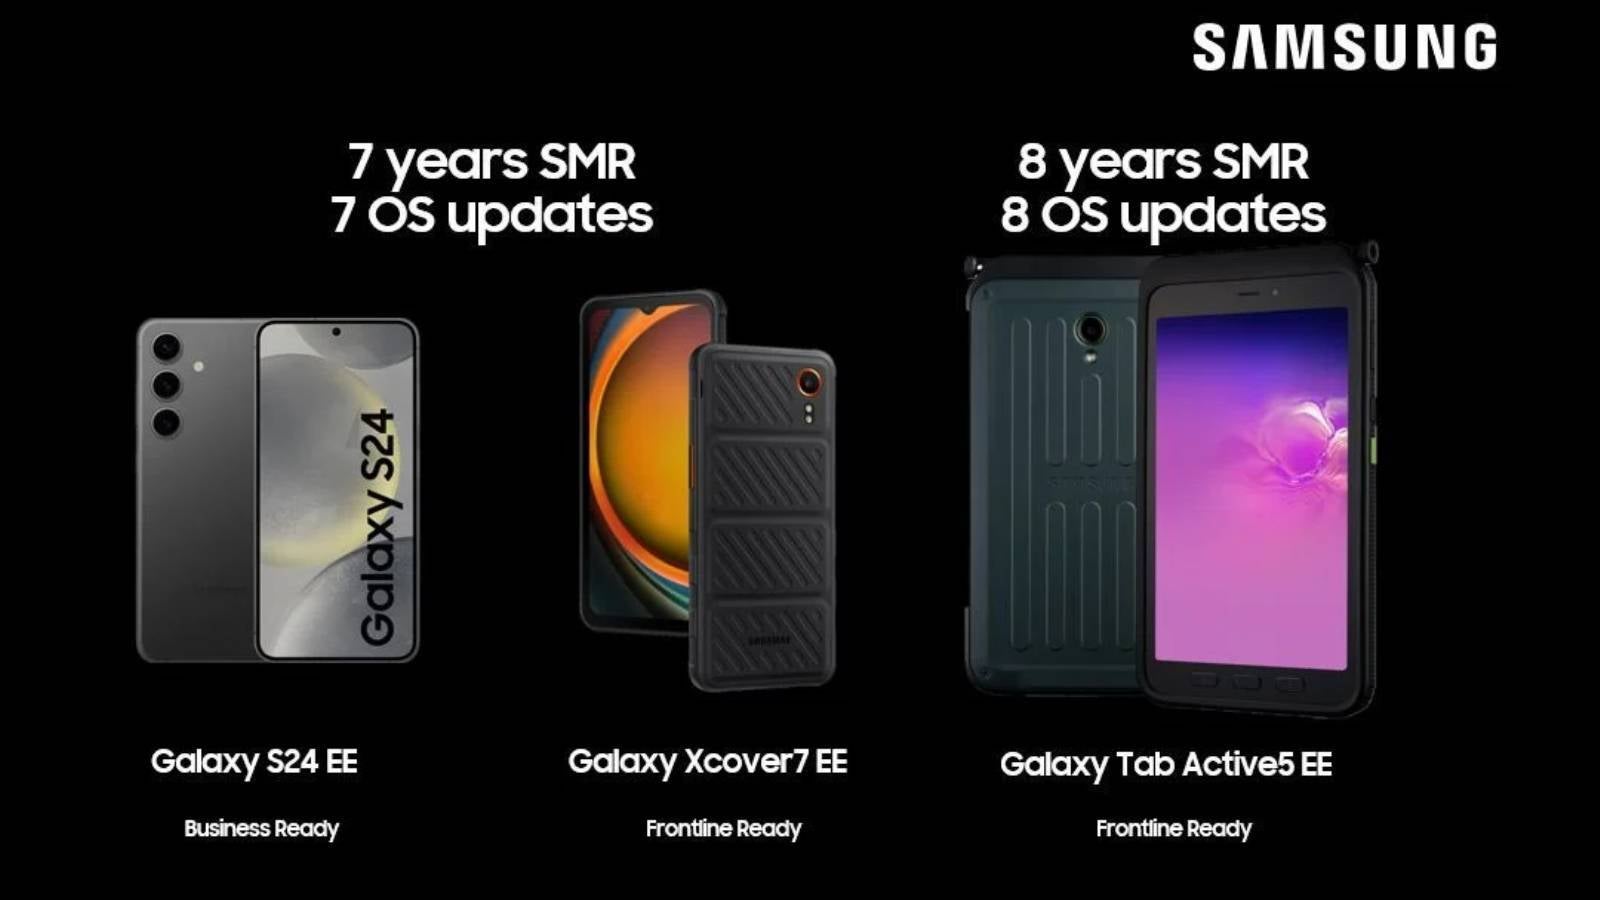 A LinkedIn post by a Samsung exec, which has been deleted, said the Galaxy Tab Active 5 enterprise edition will be supported for eight years - Samsung&#039;s new tablet promised more updates than Galaxy S24 in now-deleted post